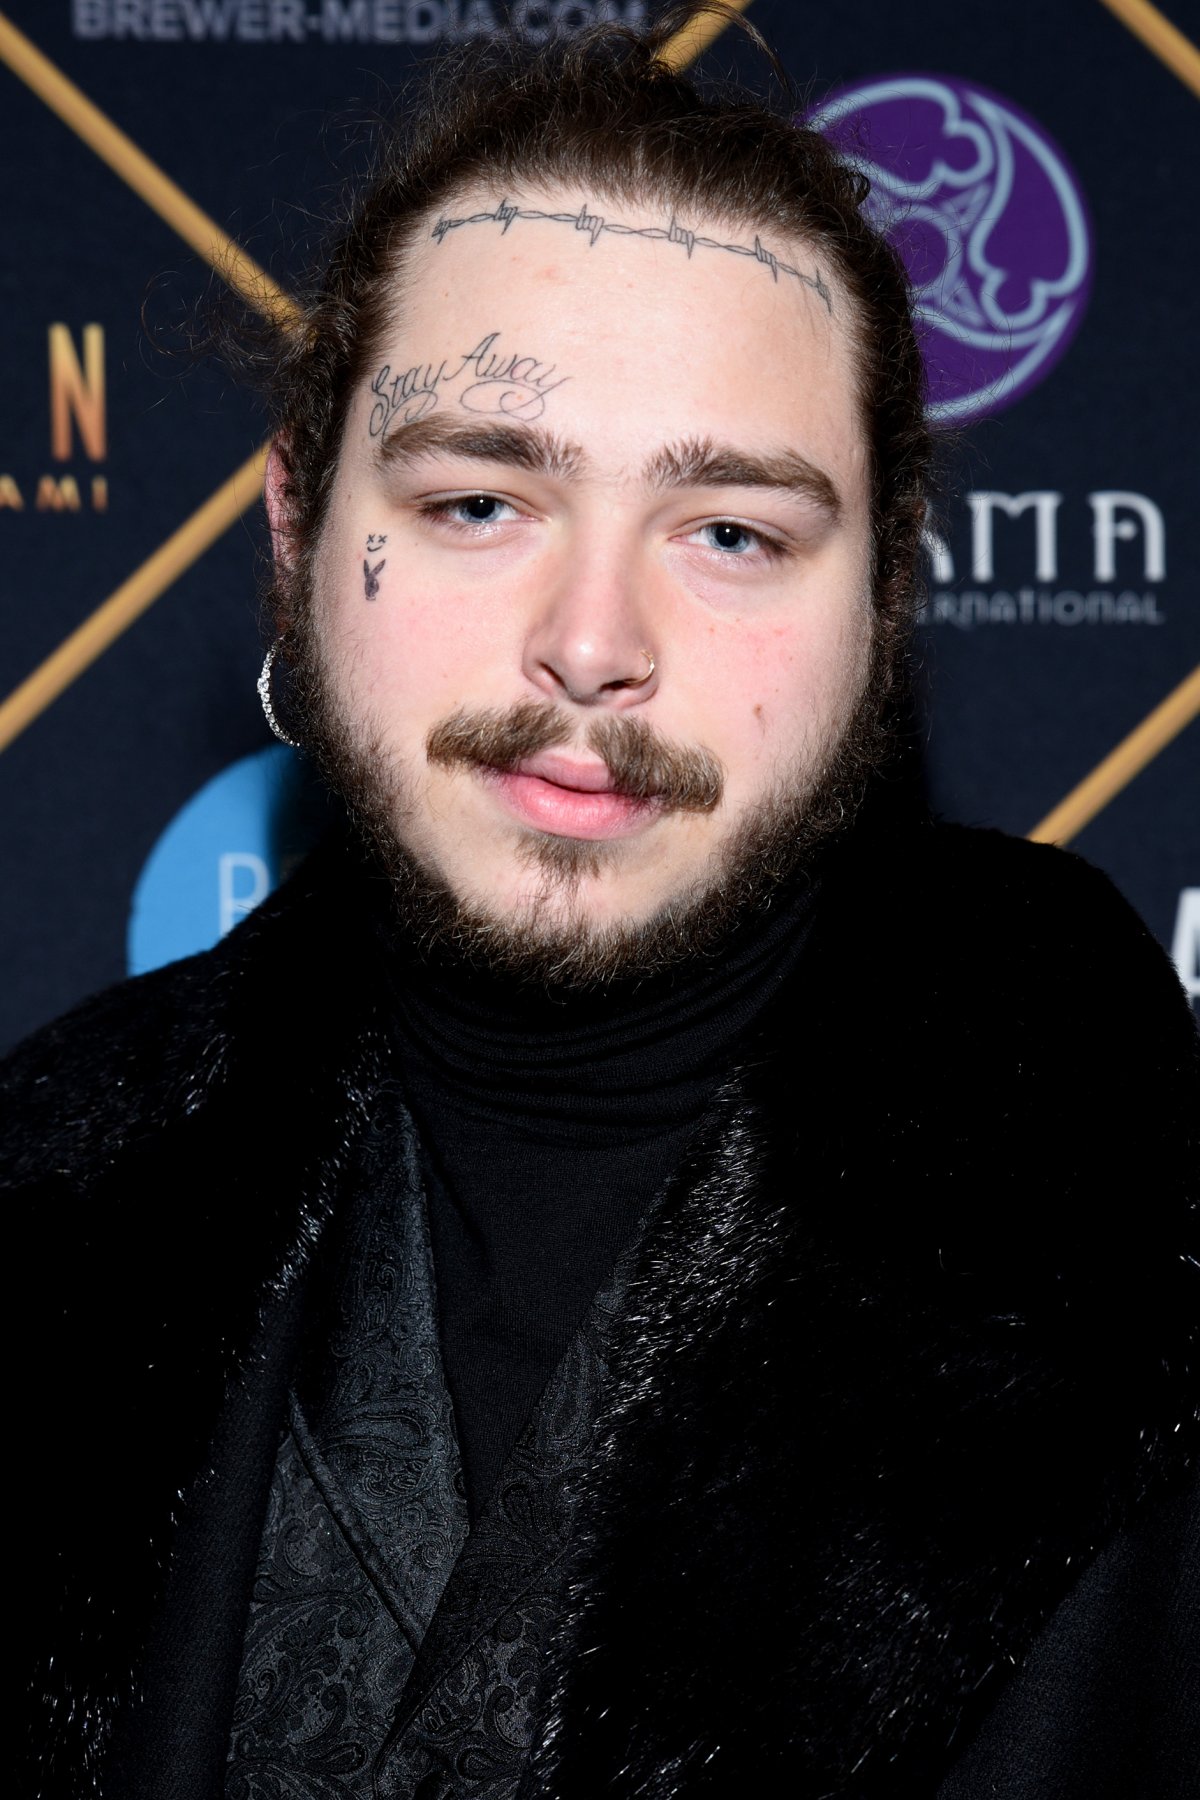 Post Malone returns with 'Chemical' single, music video Reality TV World